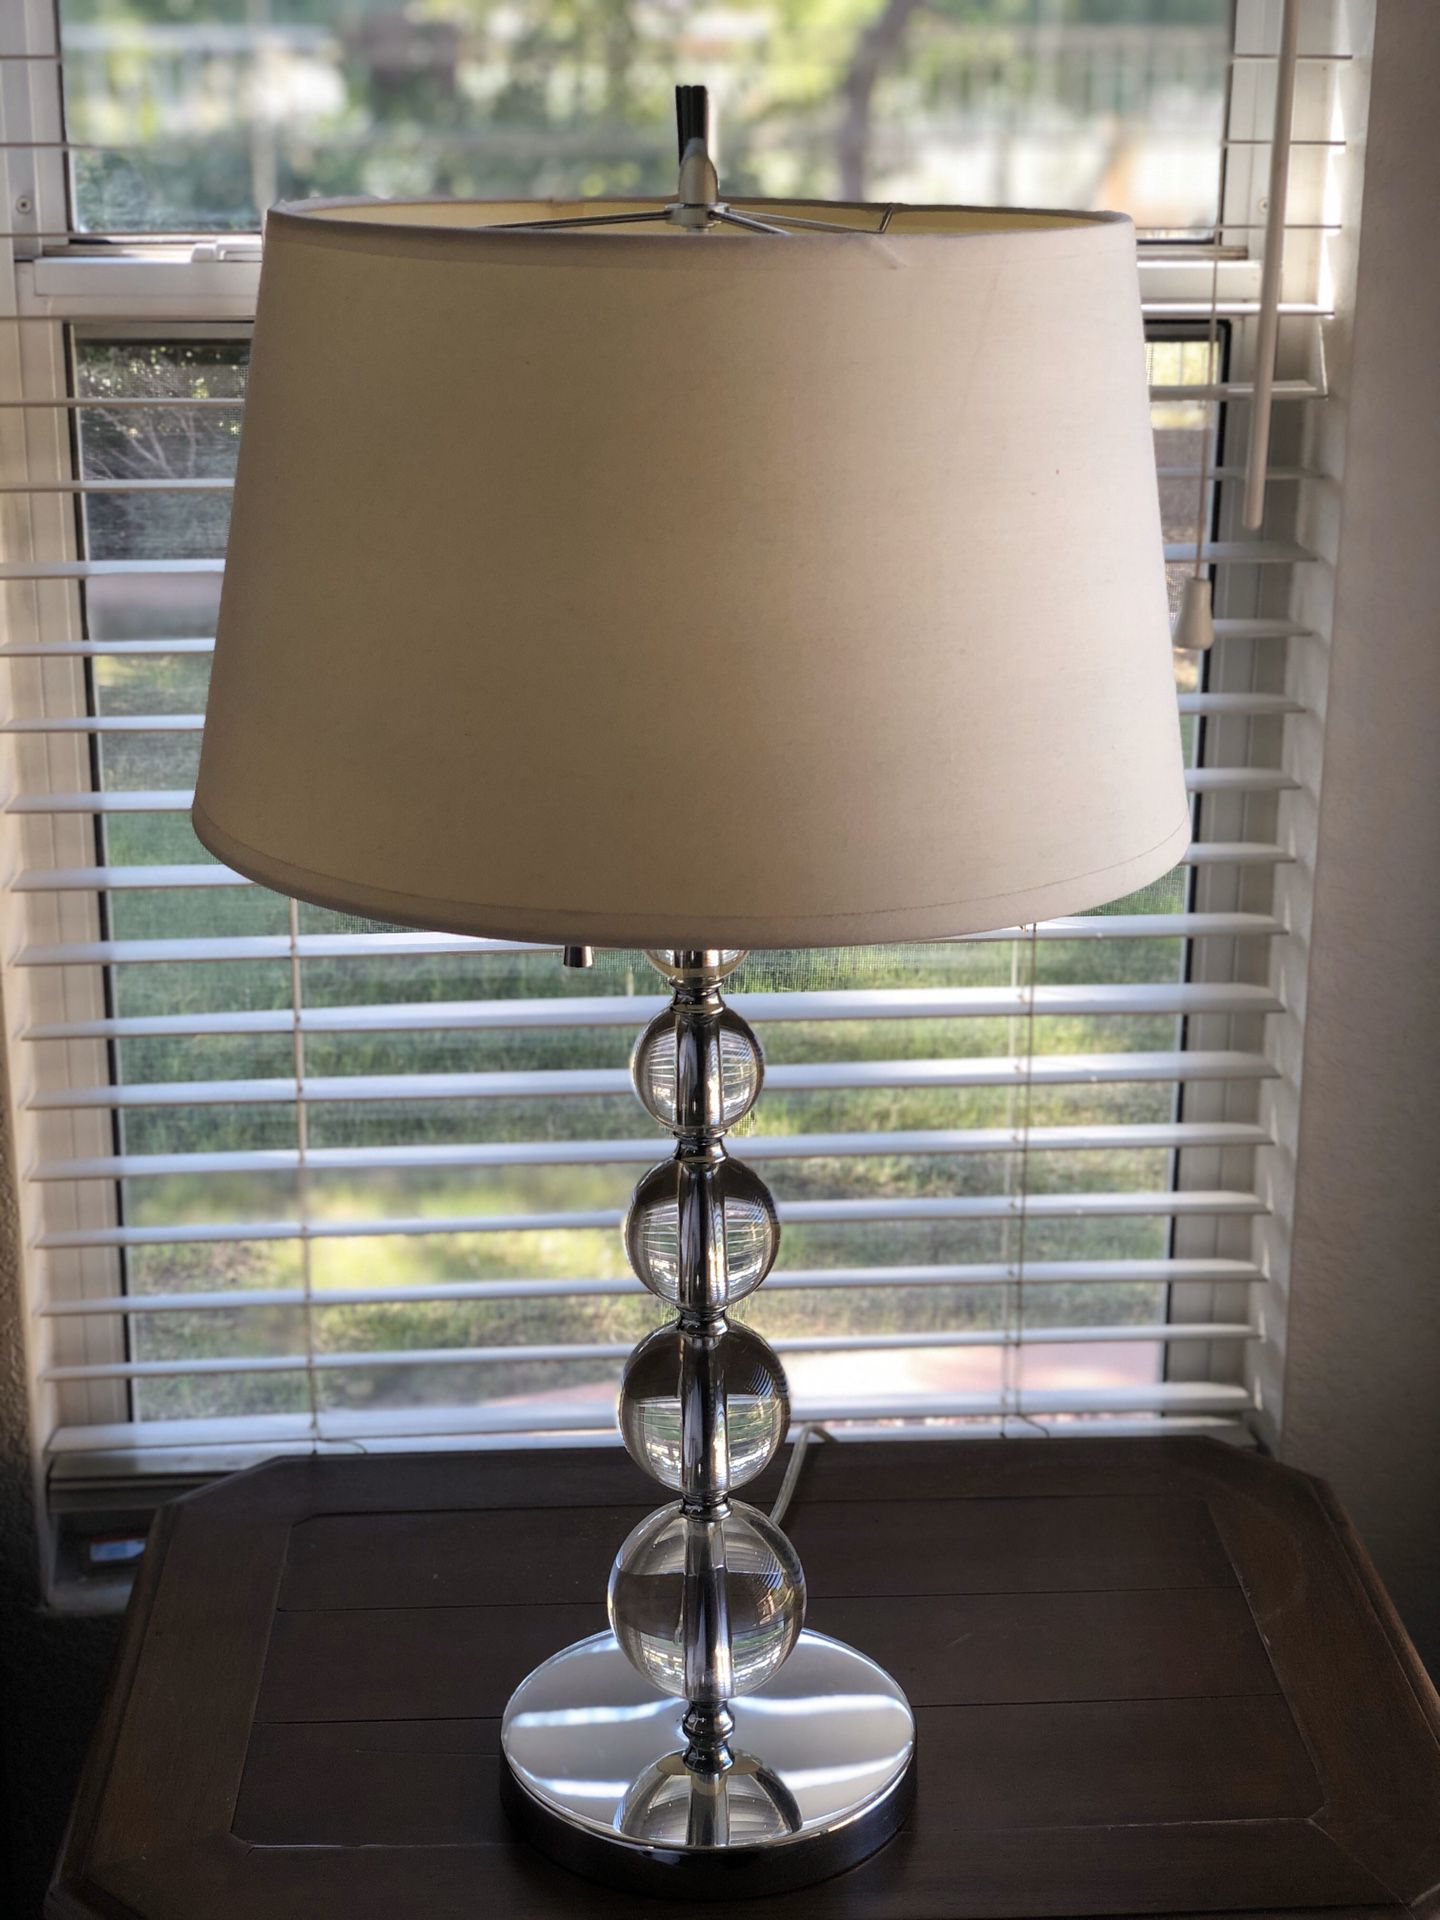 Matching Table lamps